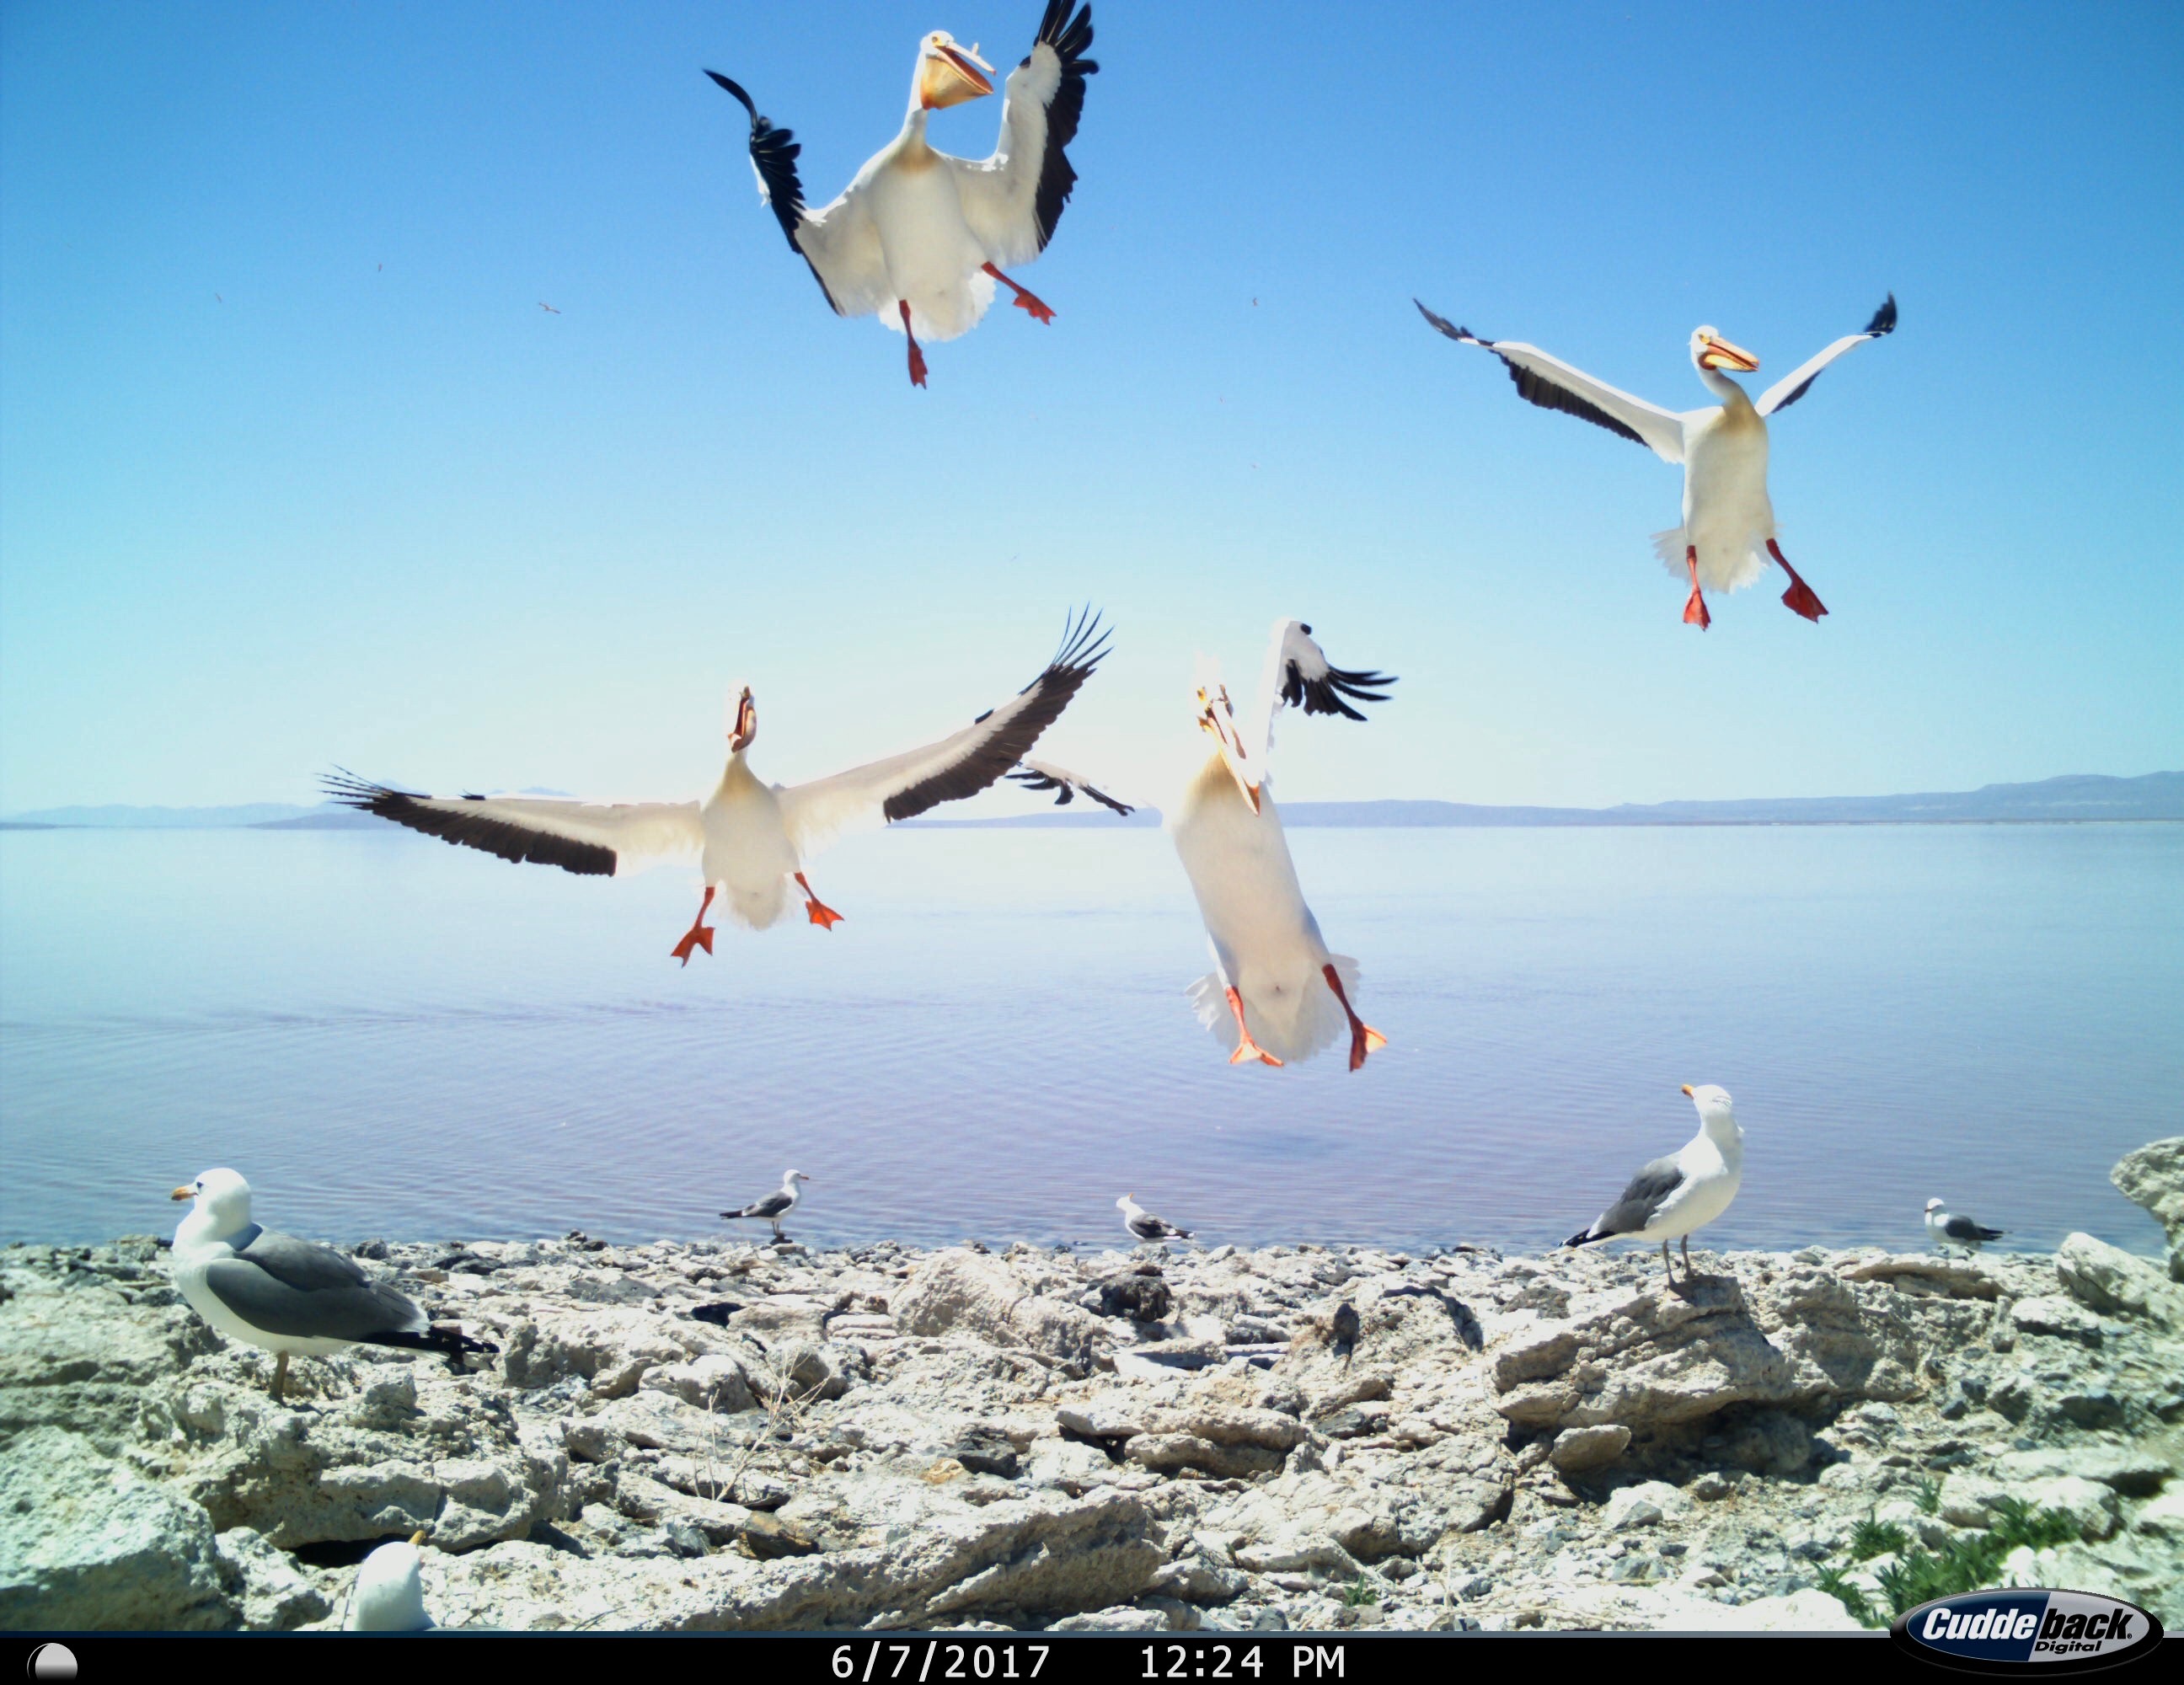 PELIcam Image courtesy Great Salt Lake Institute at Westminster College and the Utah Division of Wildlife Resources